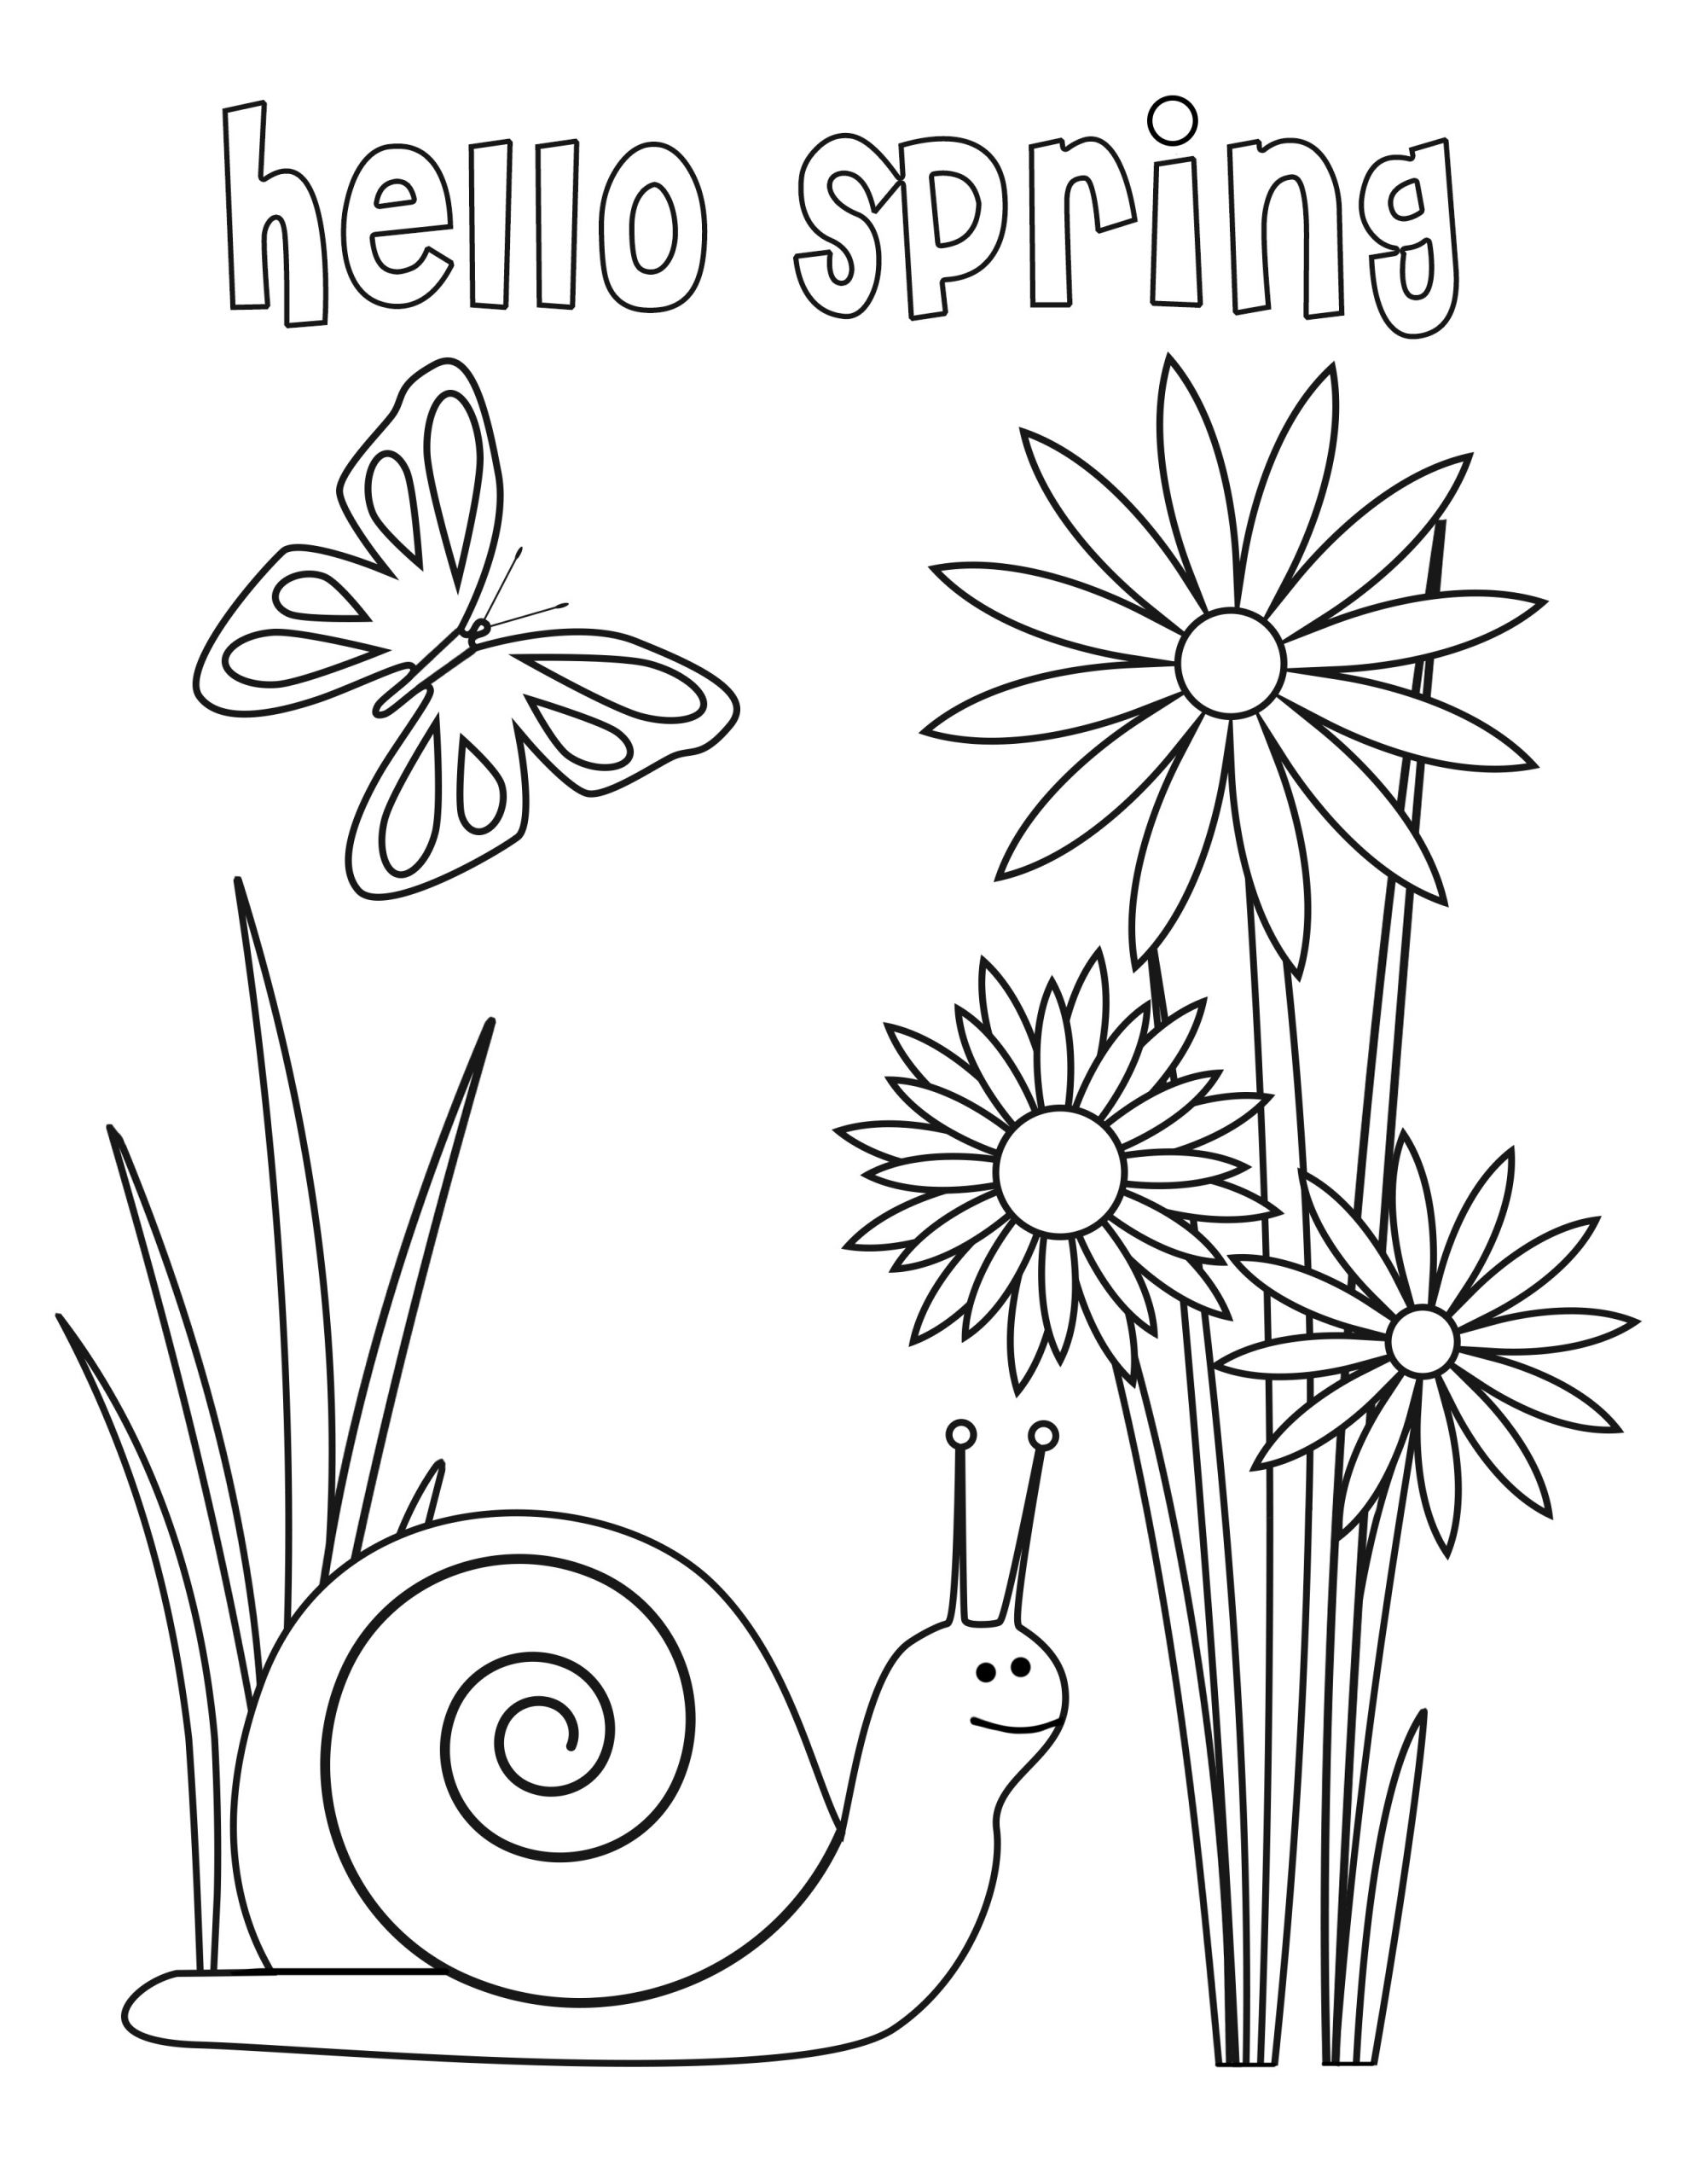 Free Spring Coloring Pages For Kids
 March Coloring Pages Best Coloring Pages For Kids